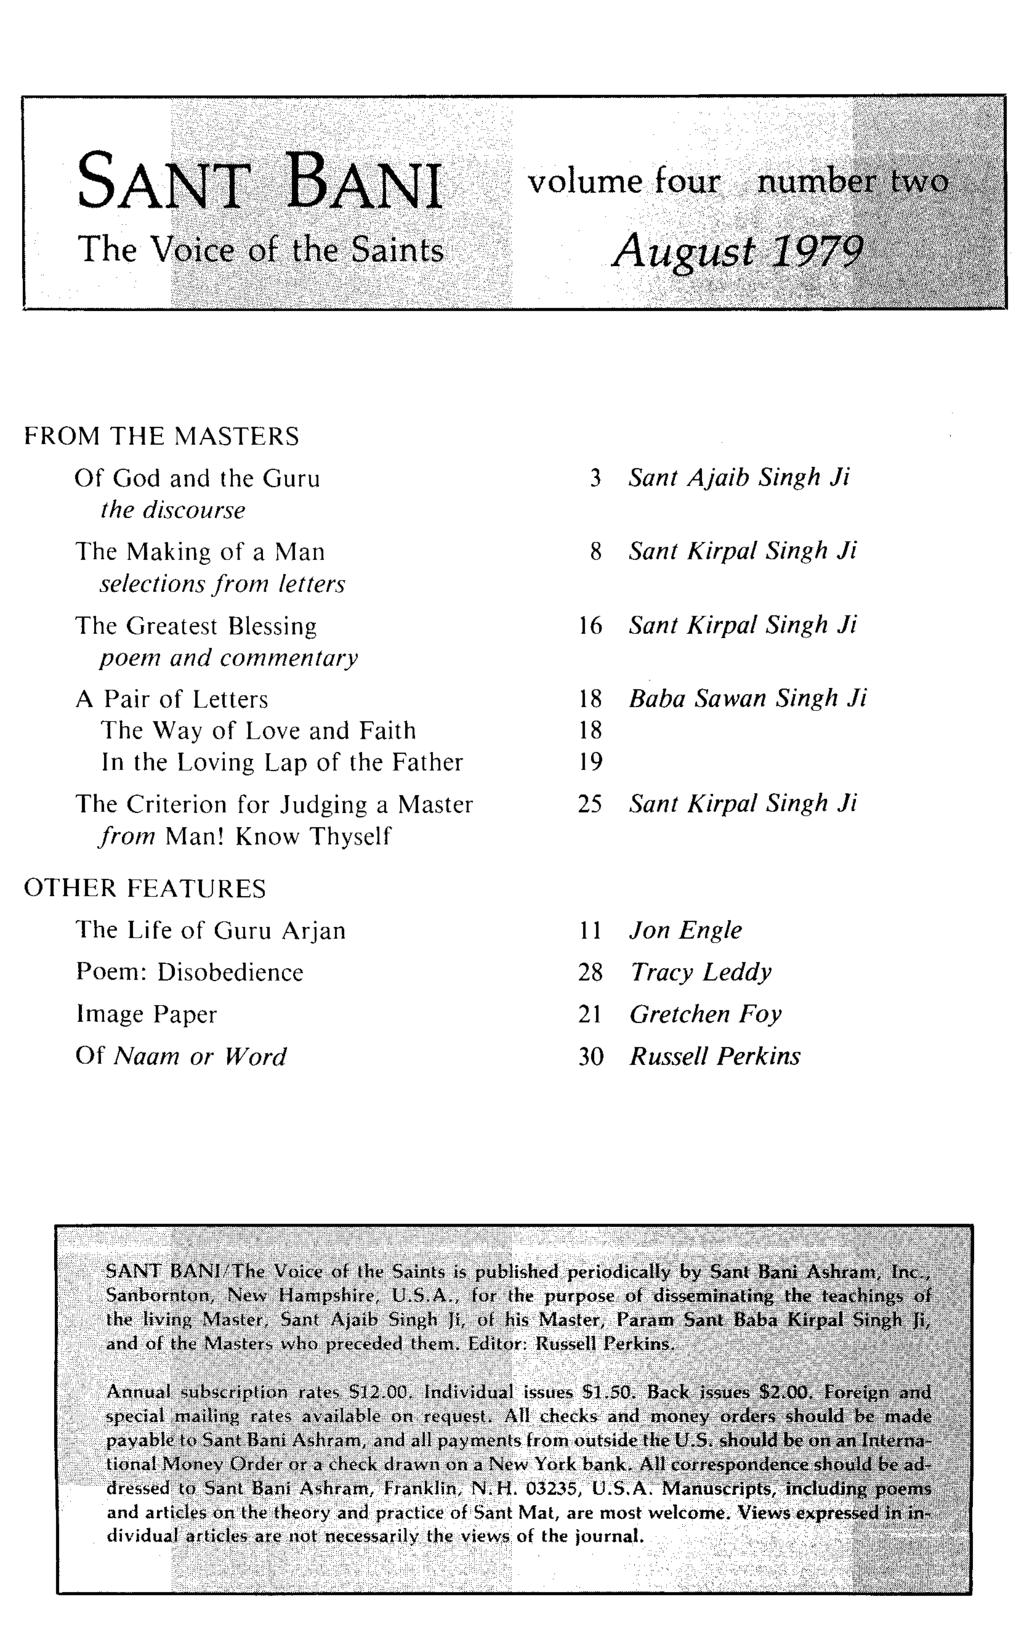 SANT BANI volume four number two The Voice of the Saints August 1979 FROM THE MASTERS Of God and the Guru the discourse The Making of a Man selections from letters The Greatest Blessing poem and